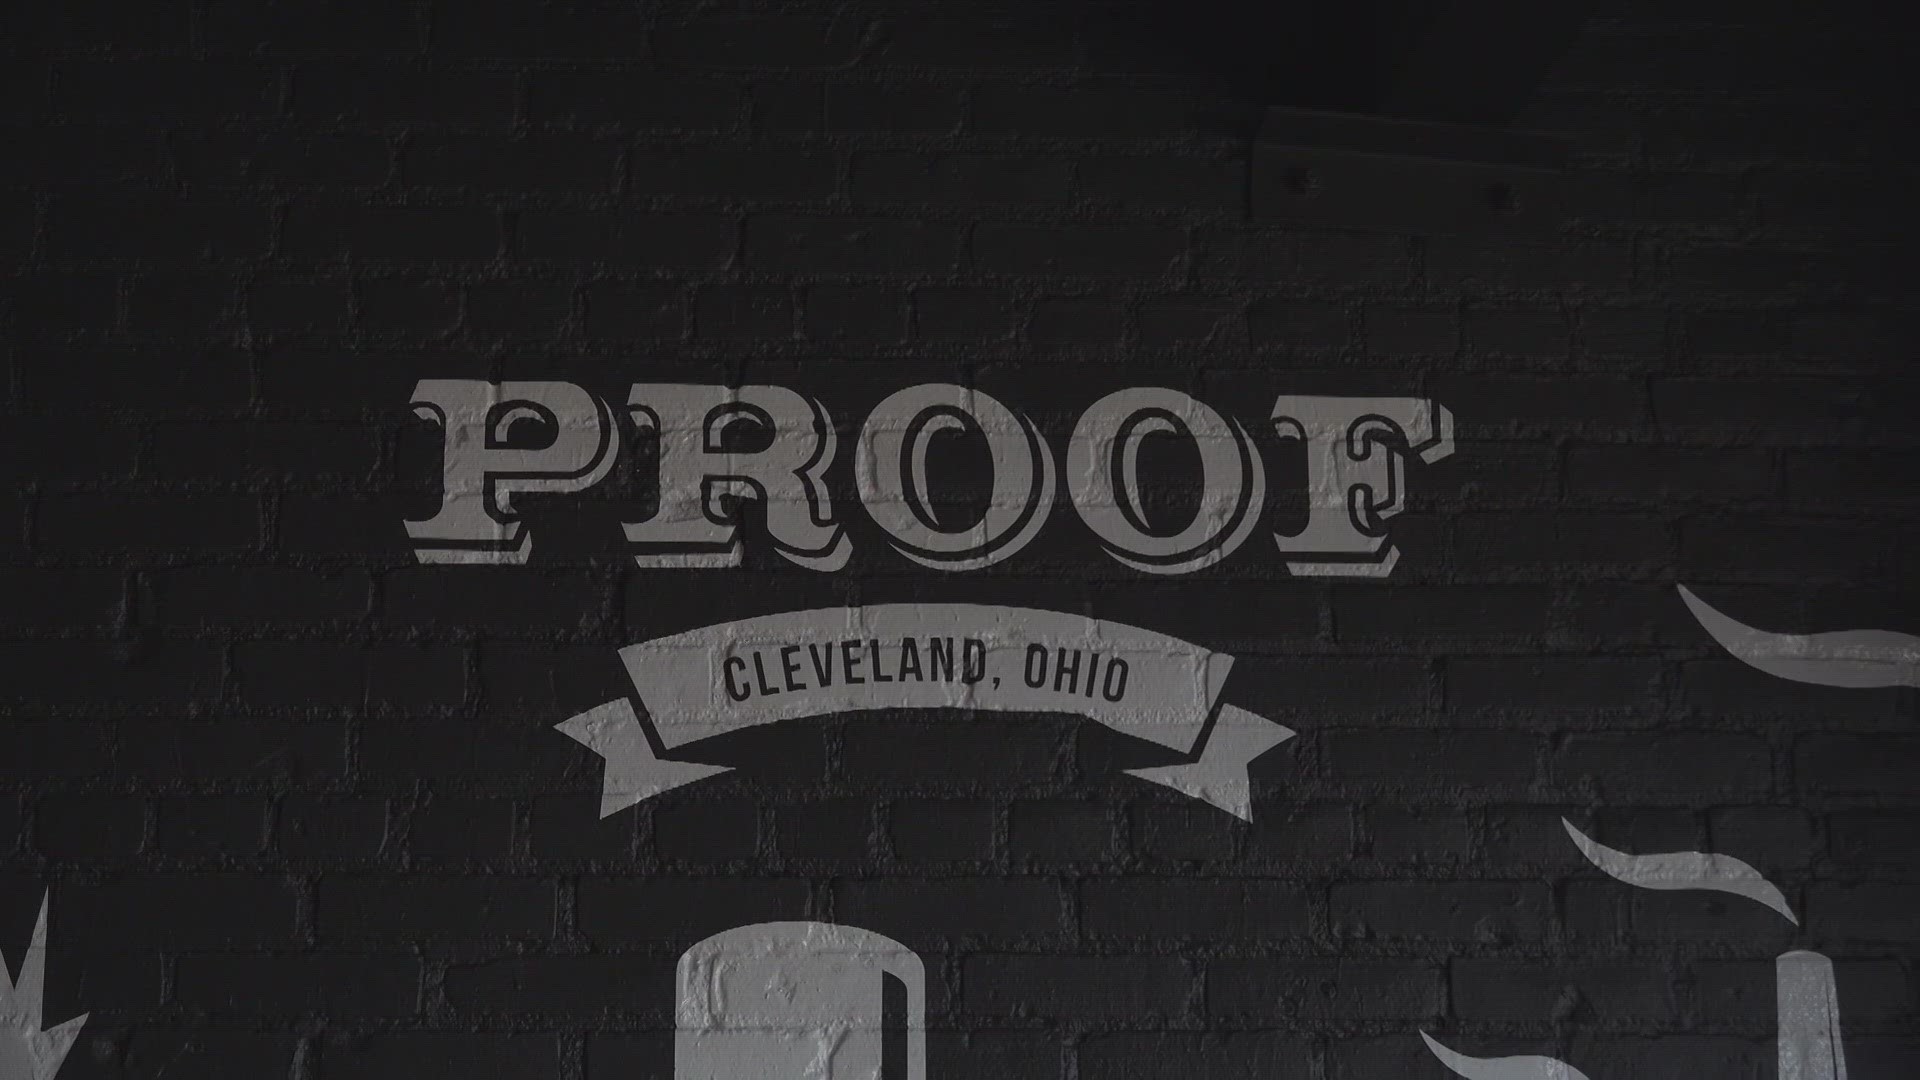 Proof isn't new to Cleveland's restaurant scene, but after opening in Tremont in 2020, they're ready for a new start.